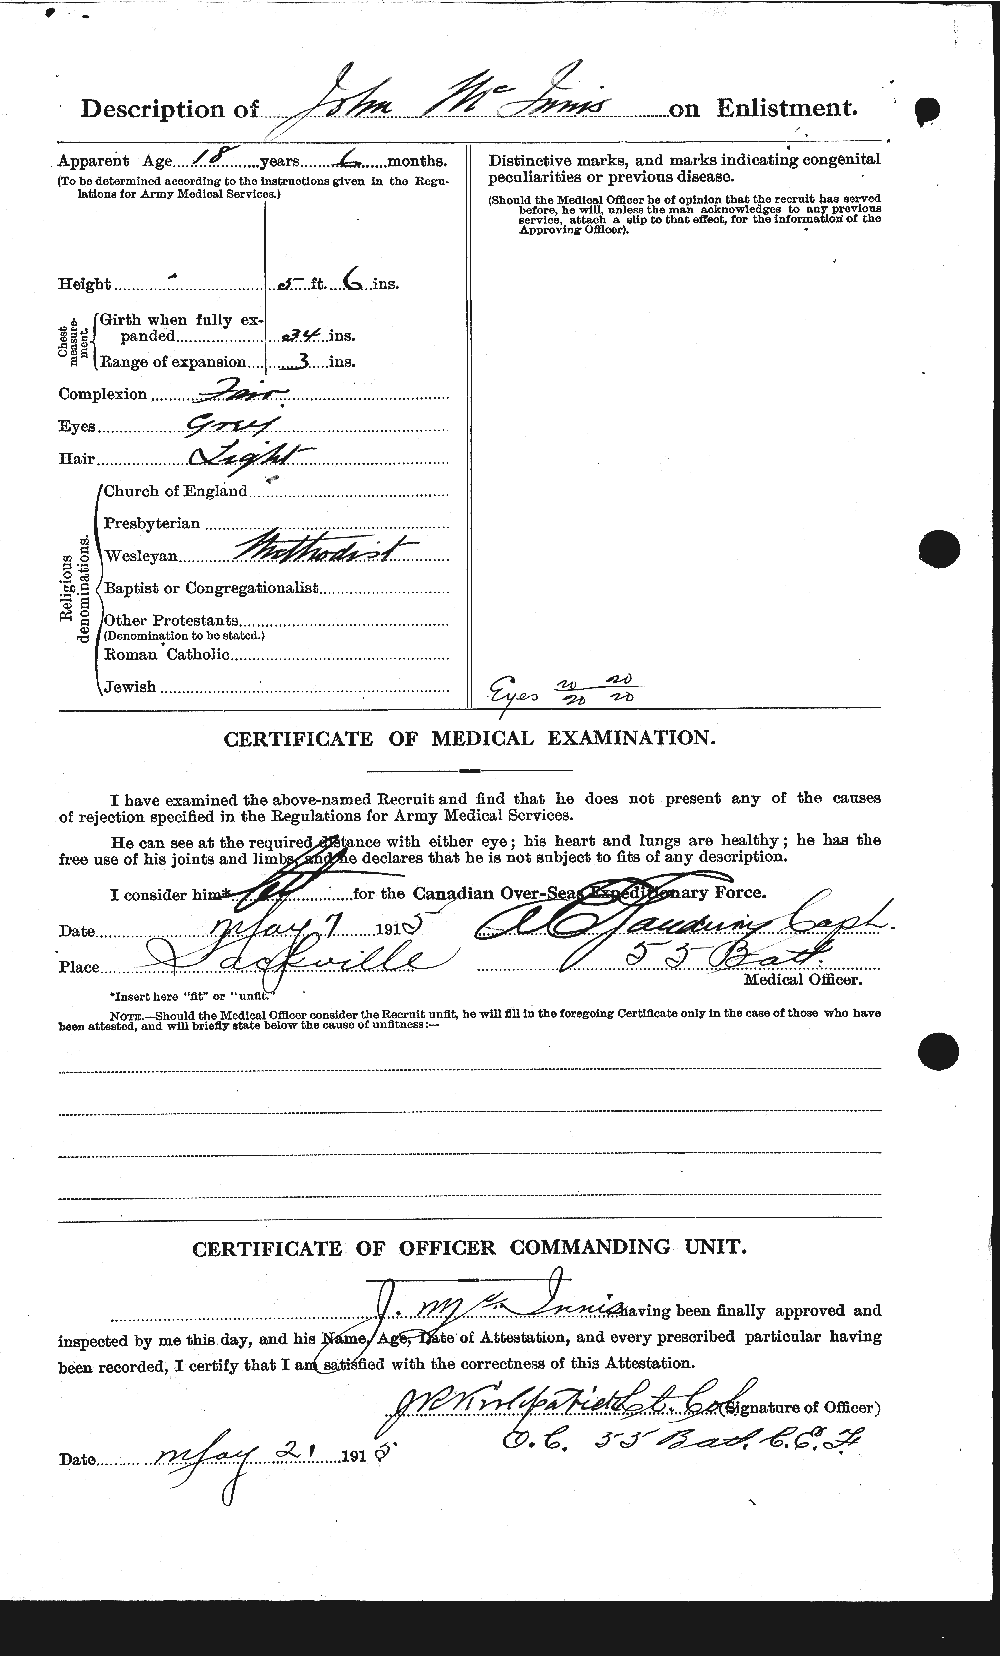 Personnel Records of the First World War - CEF 526843b